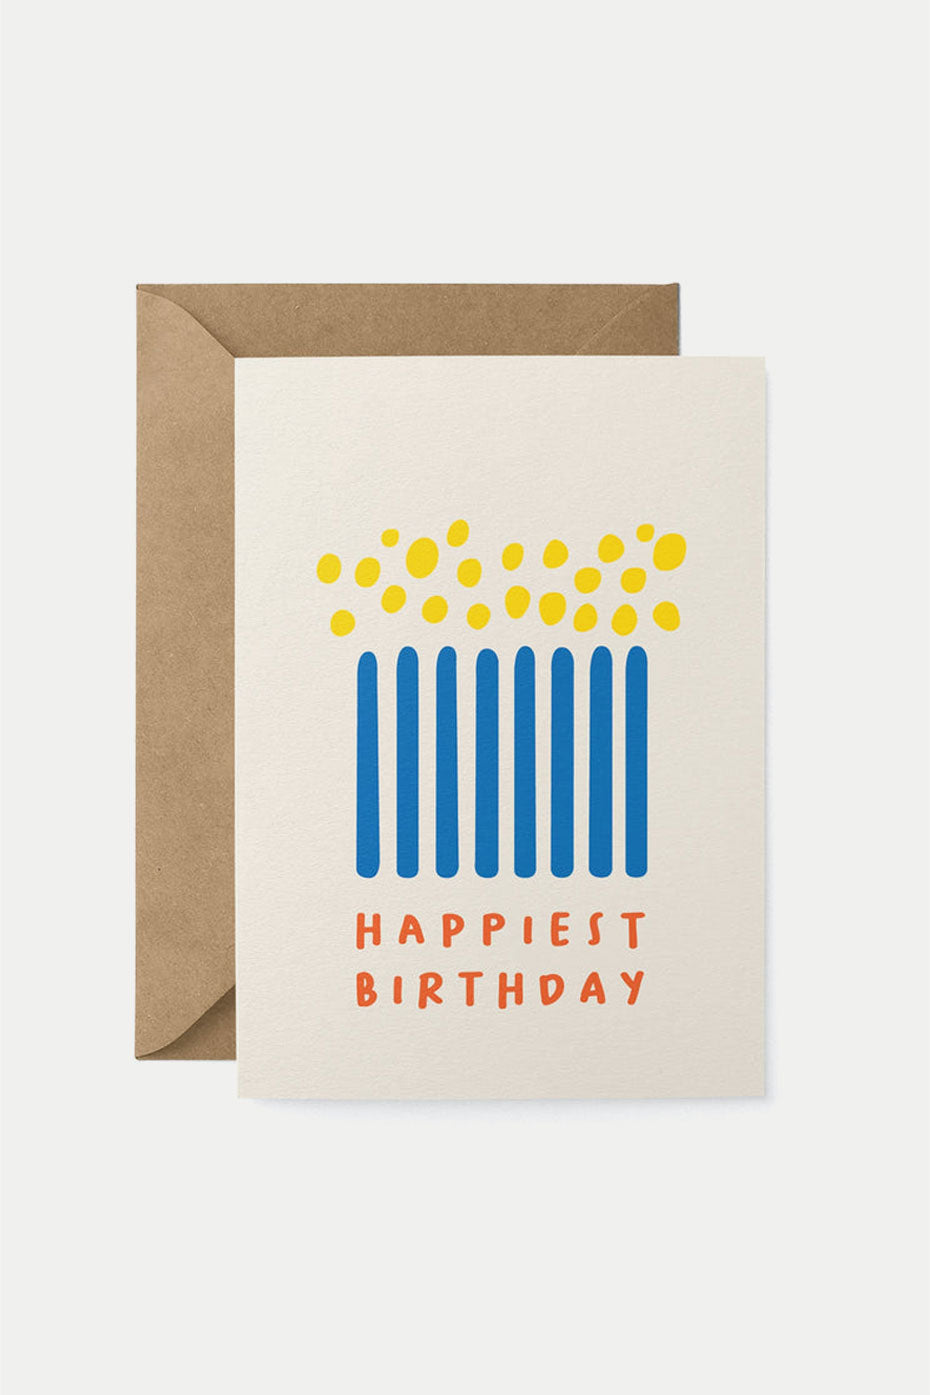 graphic-factory-happiest-birthday-card-2